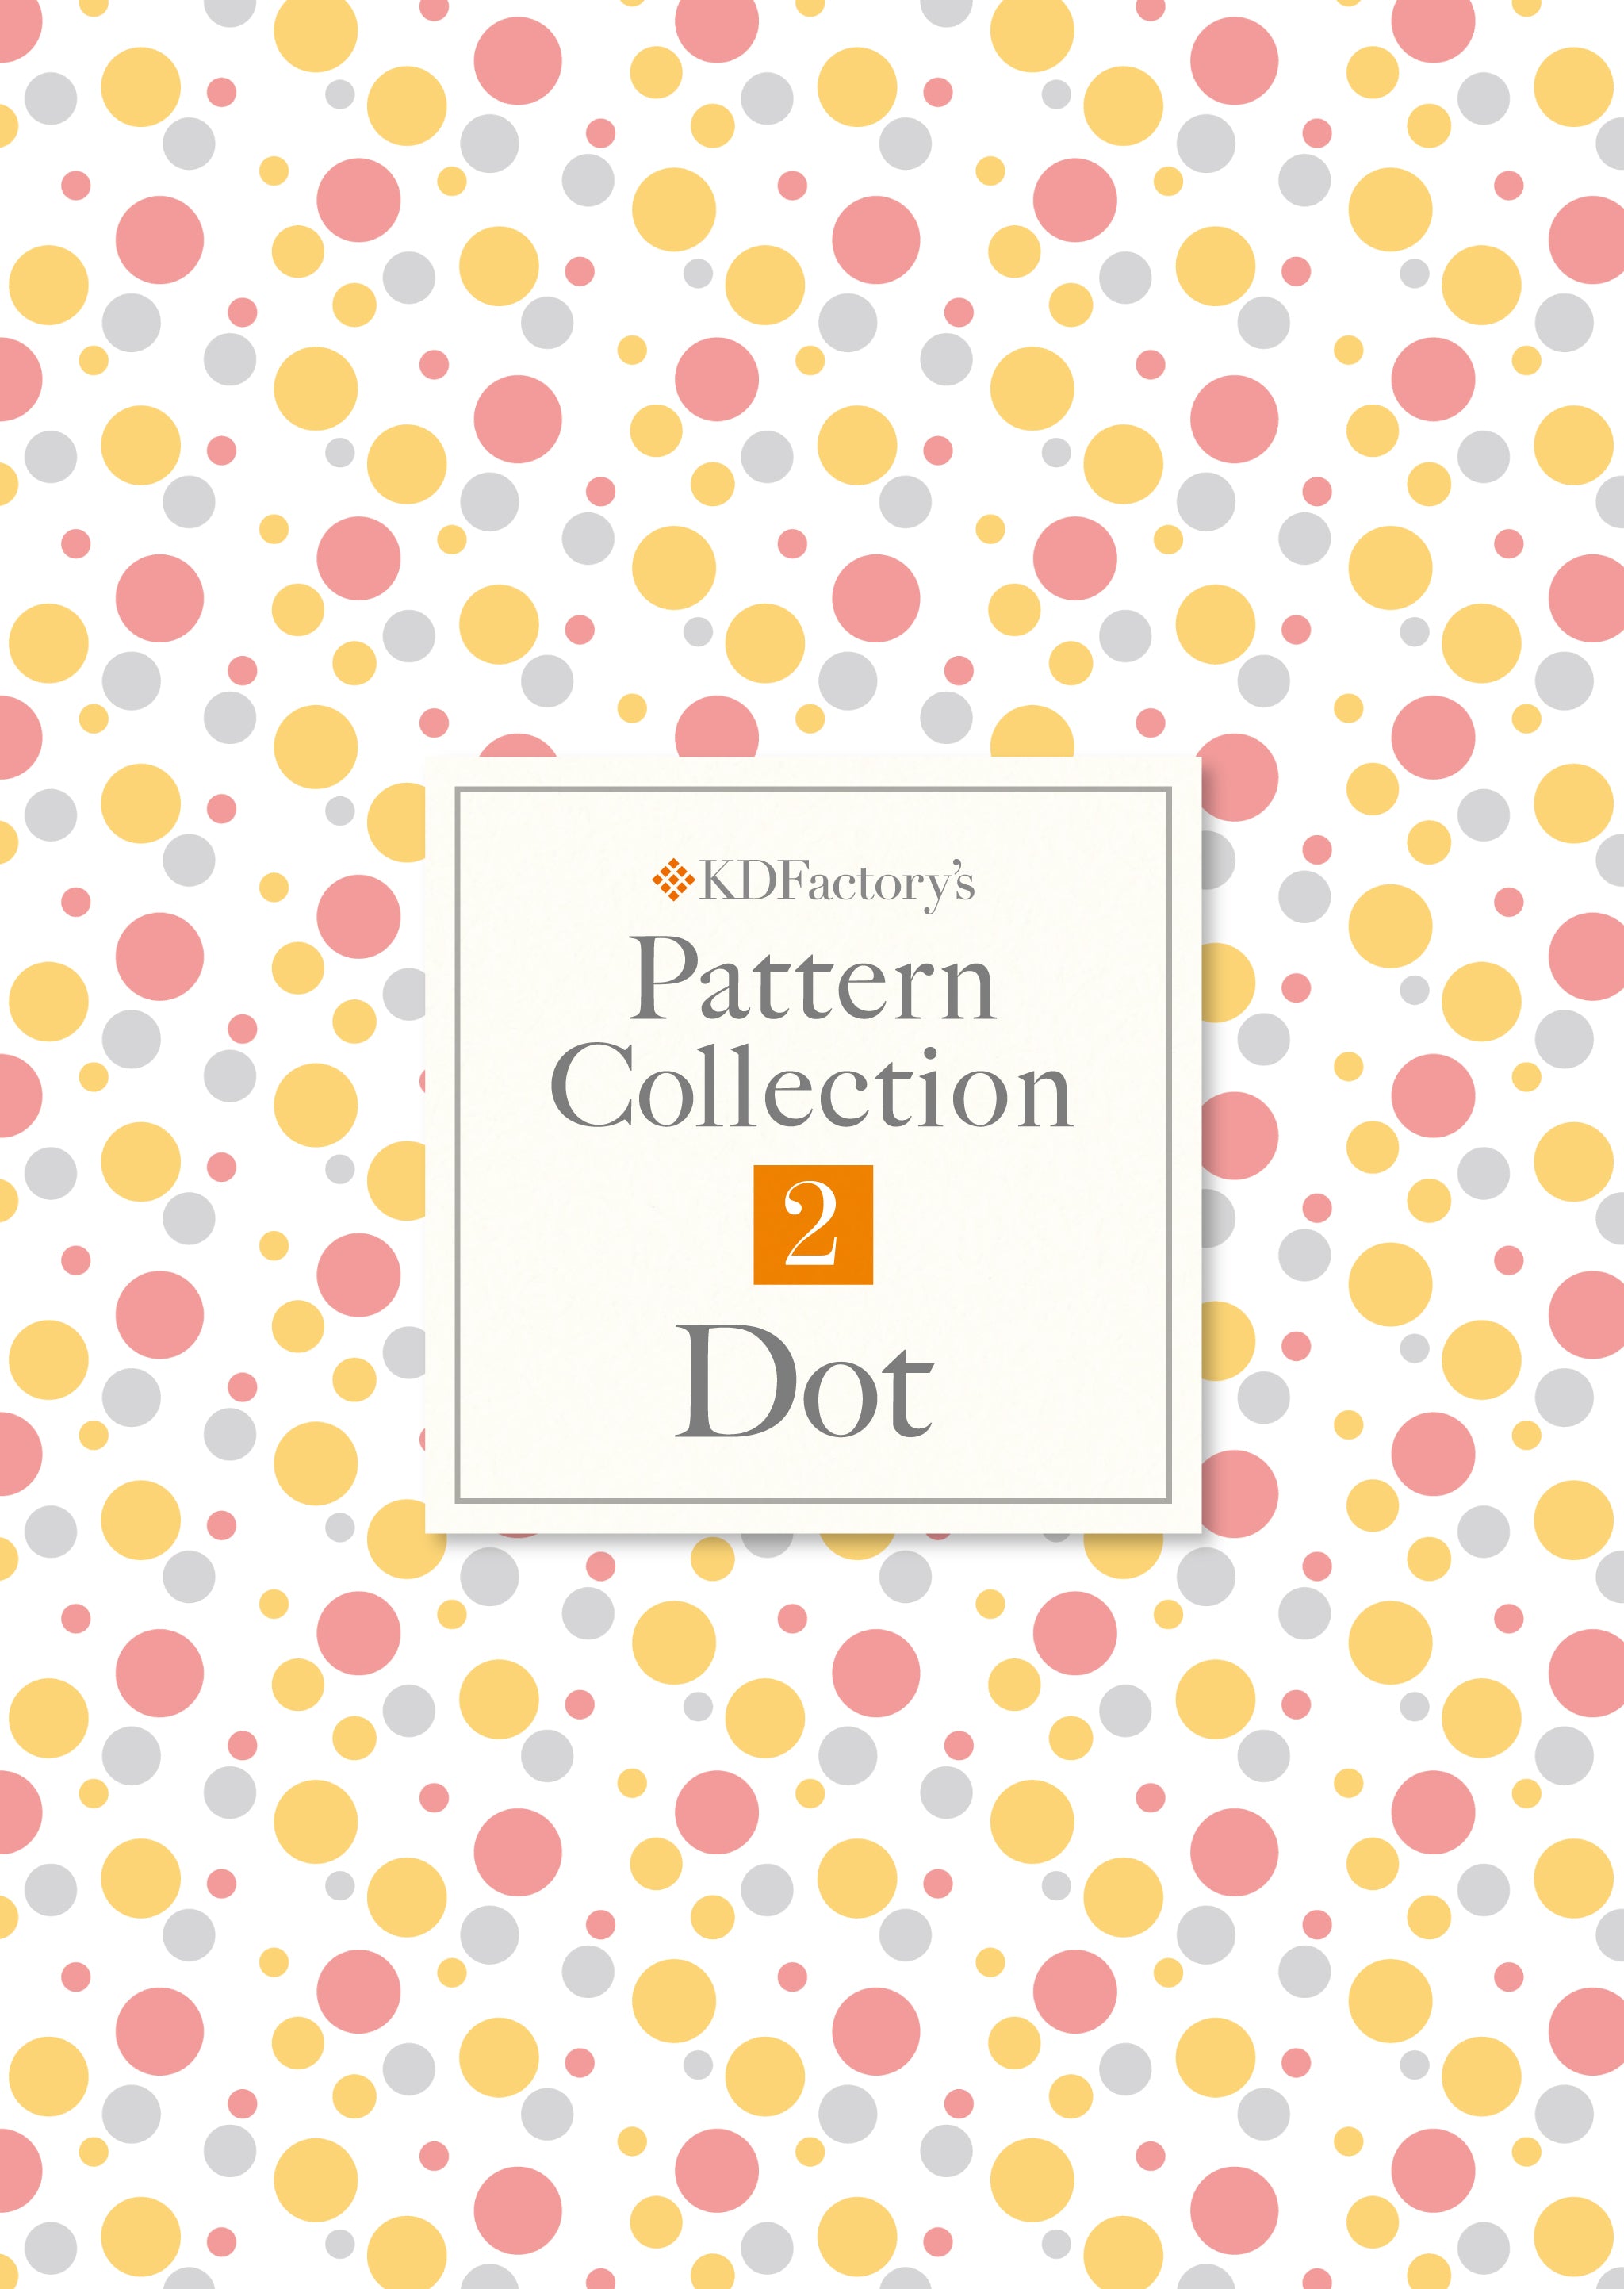 「Pattern Collection」2.Dot【ドット】